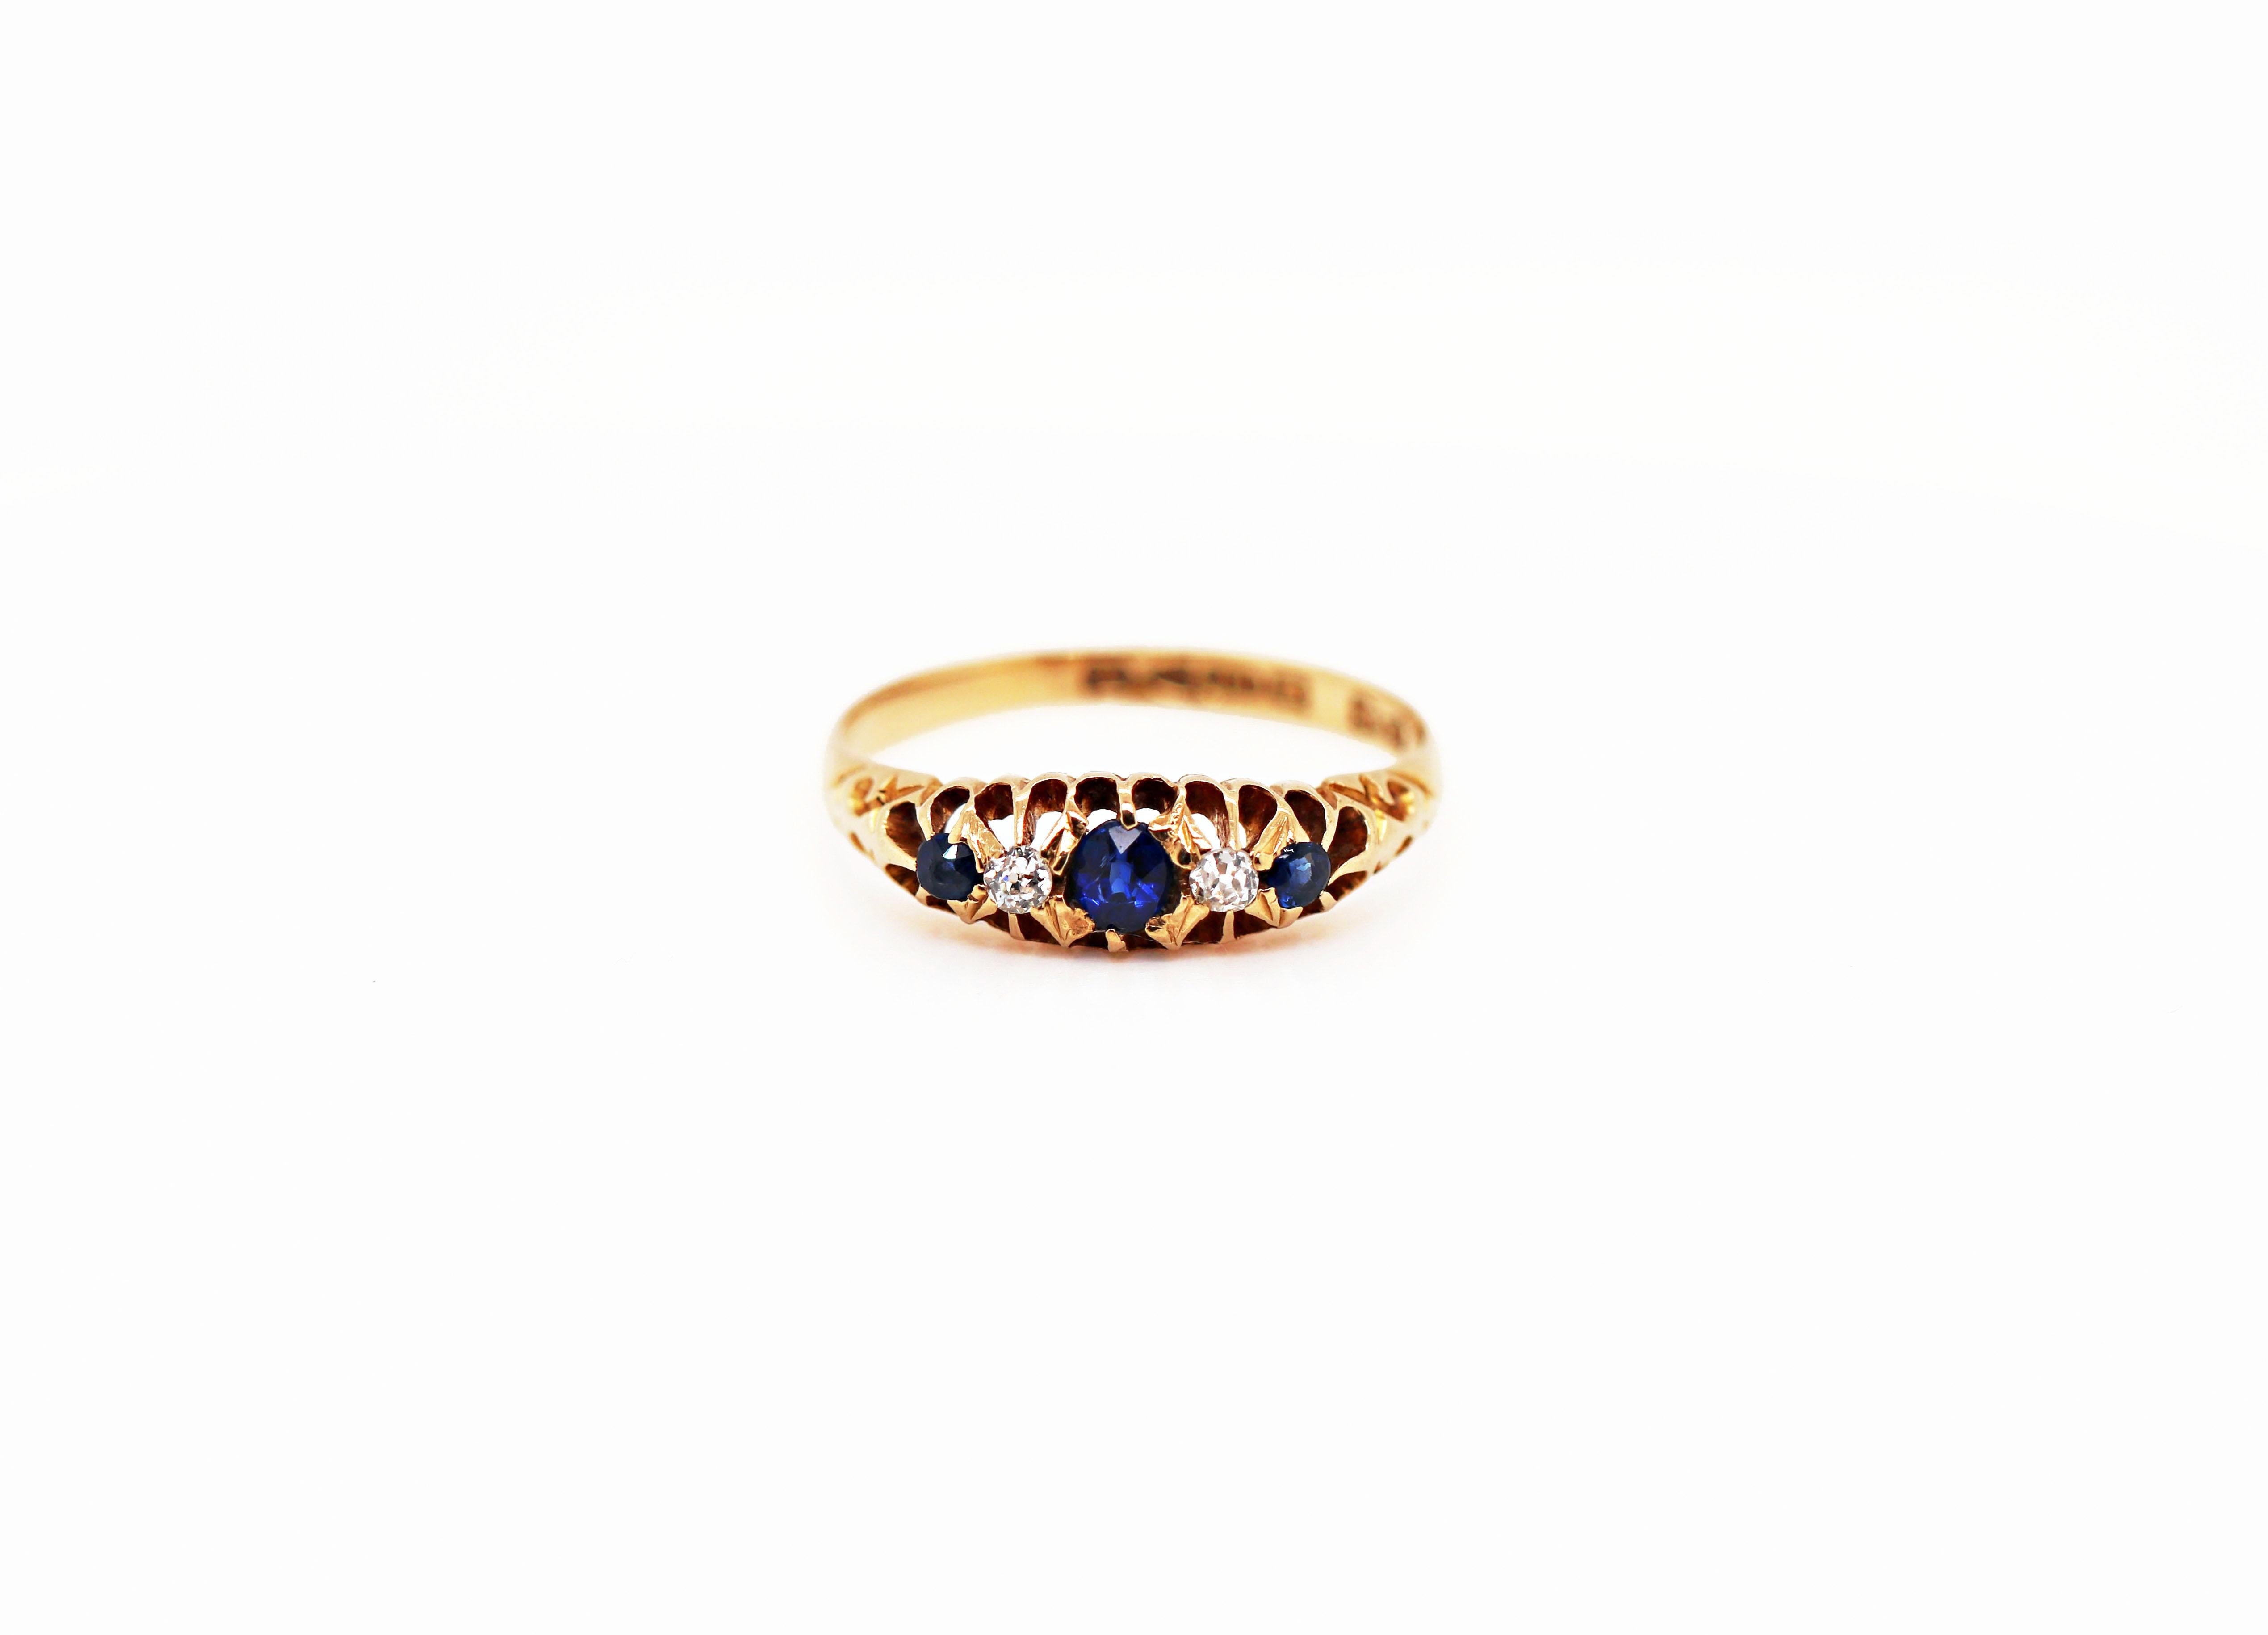 This antique ring features 3 royal blue sapphires accompanied by two old cut diamonds all mounted in a classic original Edwardian 18 carat yellow gold setting. English Hallmarks - 1906. UK finger size 'M'. 